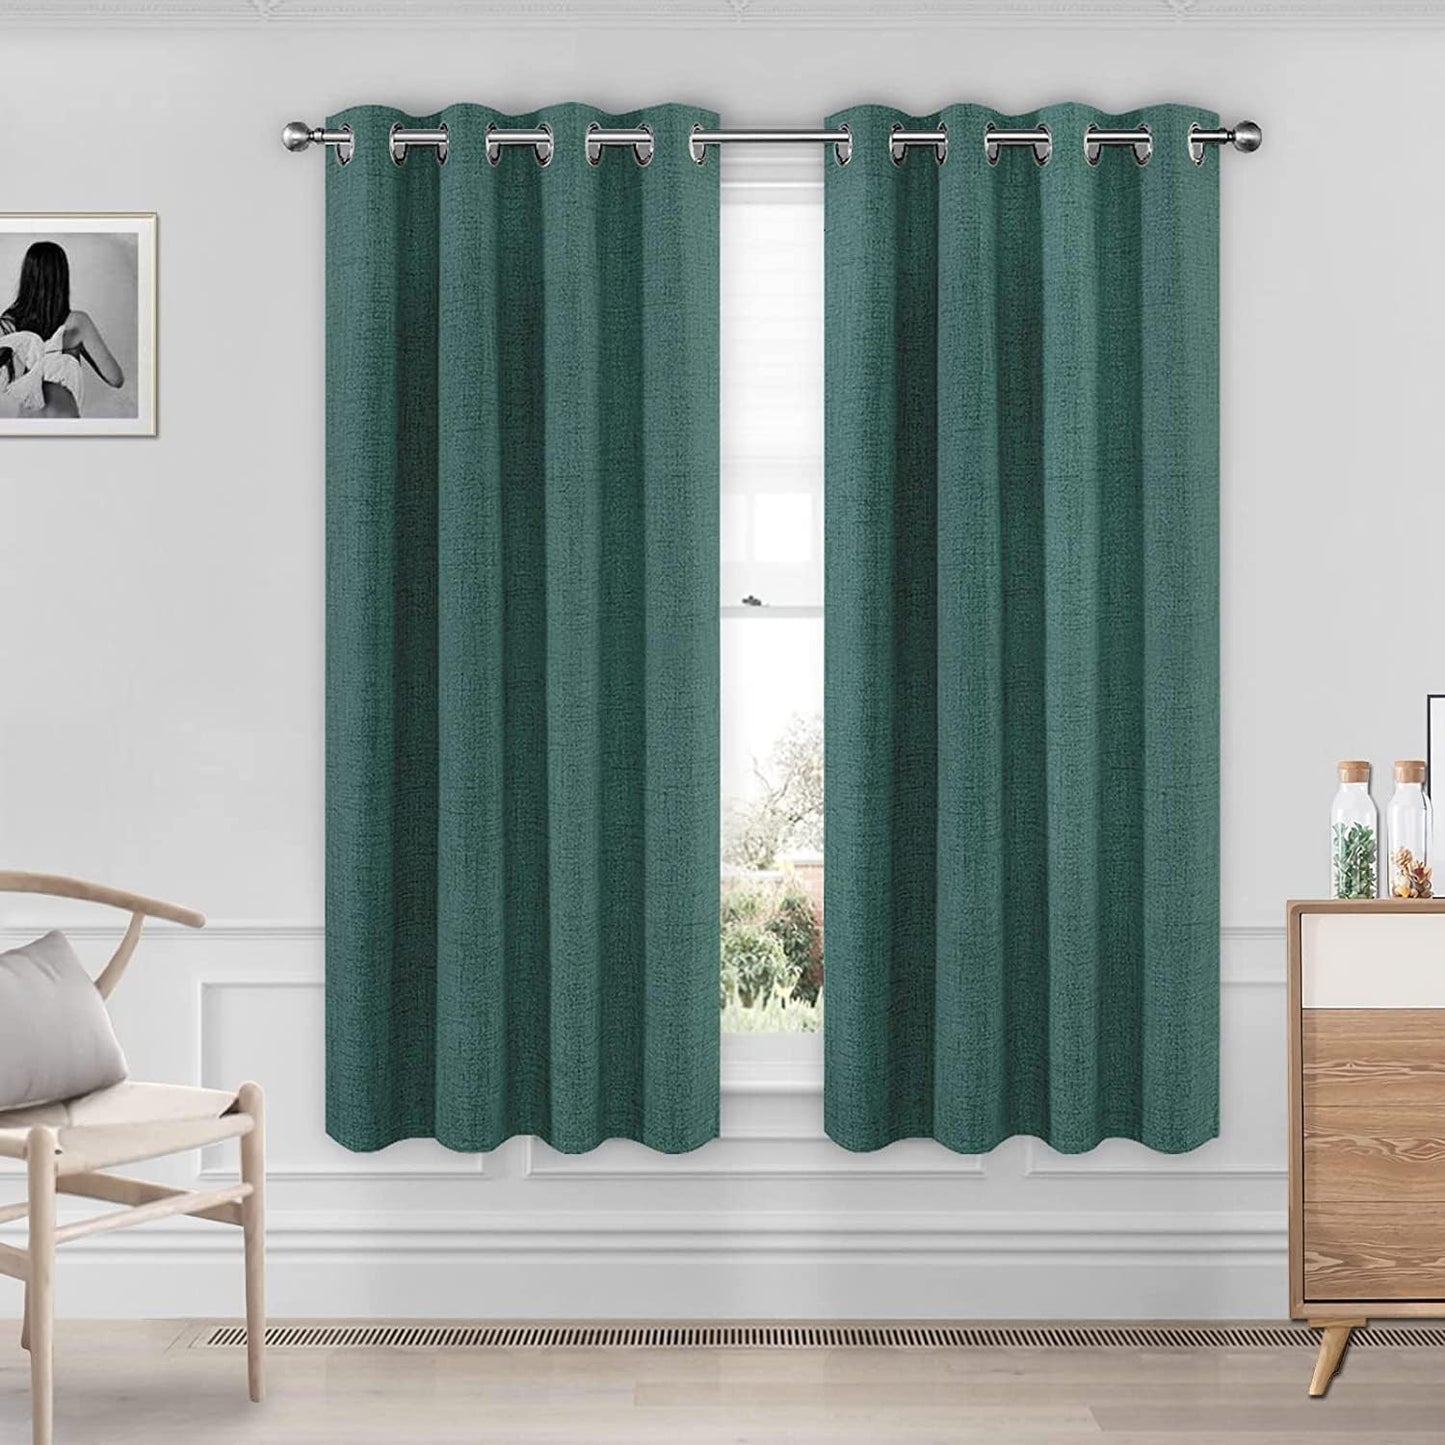 CUCRAF Full Blackout Window Curtains 84 Inches Long,Faux Linen Look Thermal Insulated Grommet Drapes Panels for Bedroom Living Room,Set of 2(52 X 84 Inches, Light Khaki)  CUCRAF Hunter Green 52 X 72 Inches 